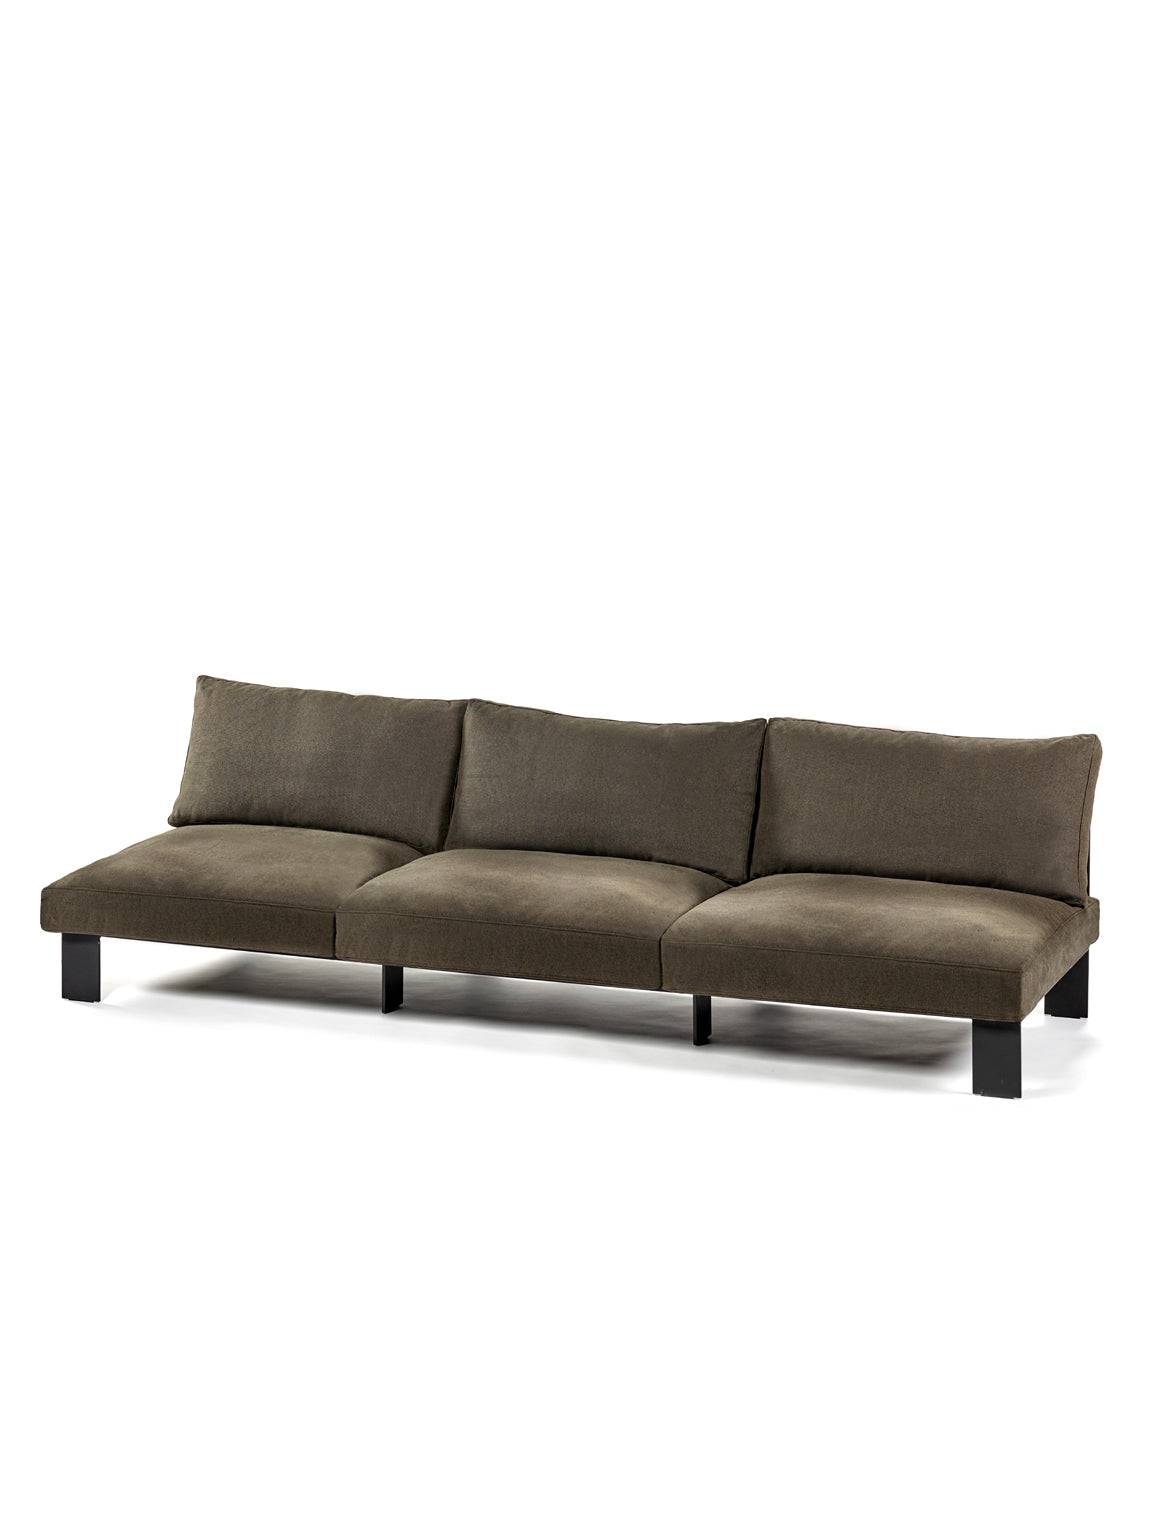 Mombaers Outdoor Sofa - Umber - THAT COOL LIVING